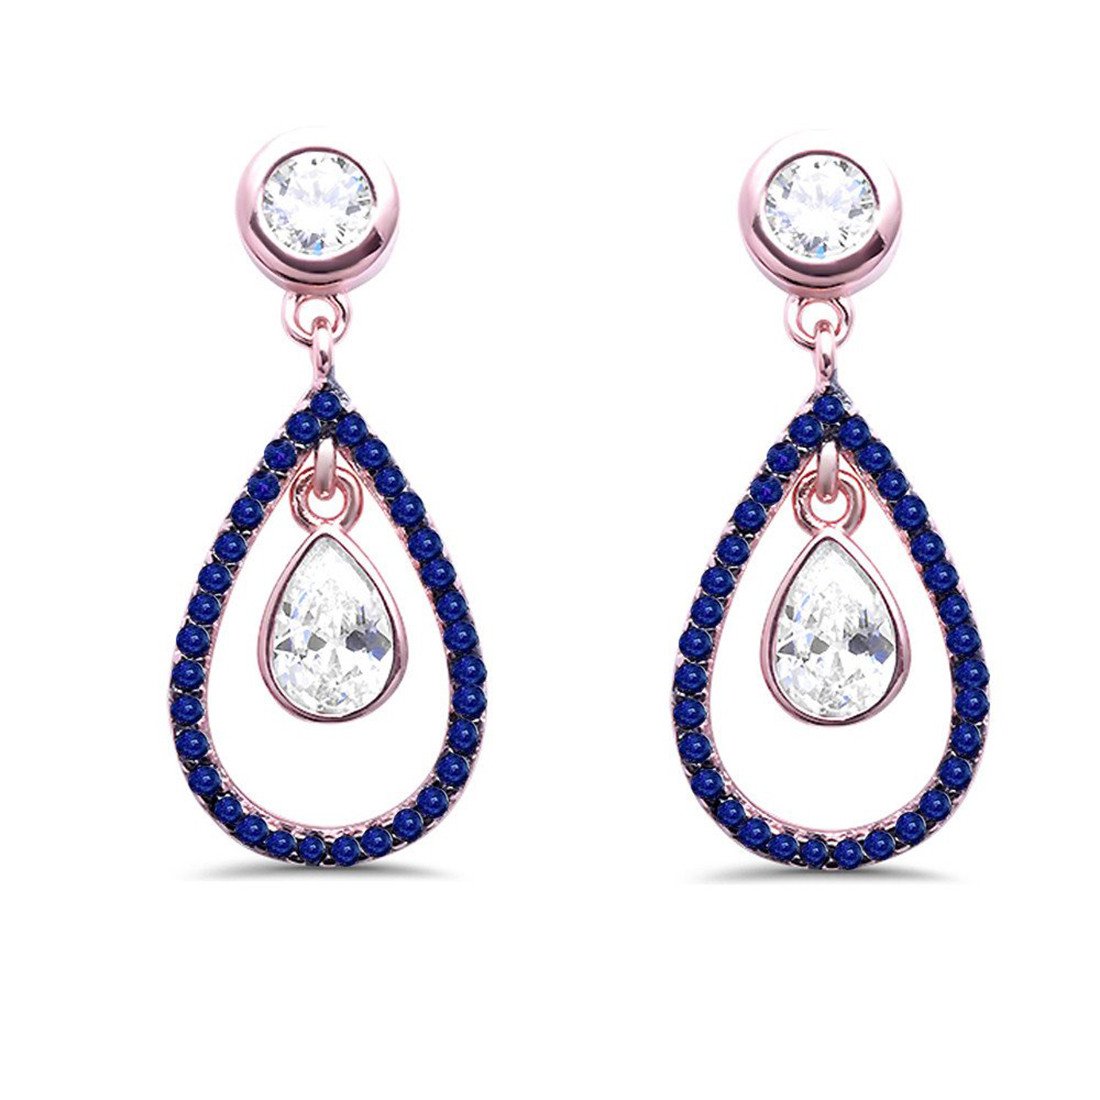 24mm Drop Dangling Earrings Teardrop Pear Round Black CZ Rose Gold Plated Sterling Silver Rose Tone, Simulated Blue Sapphire